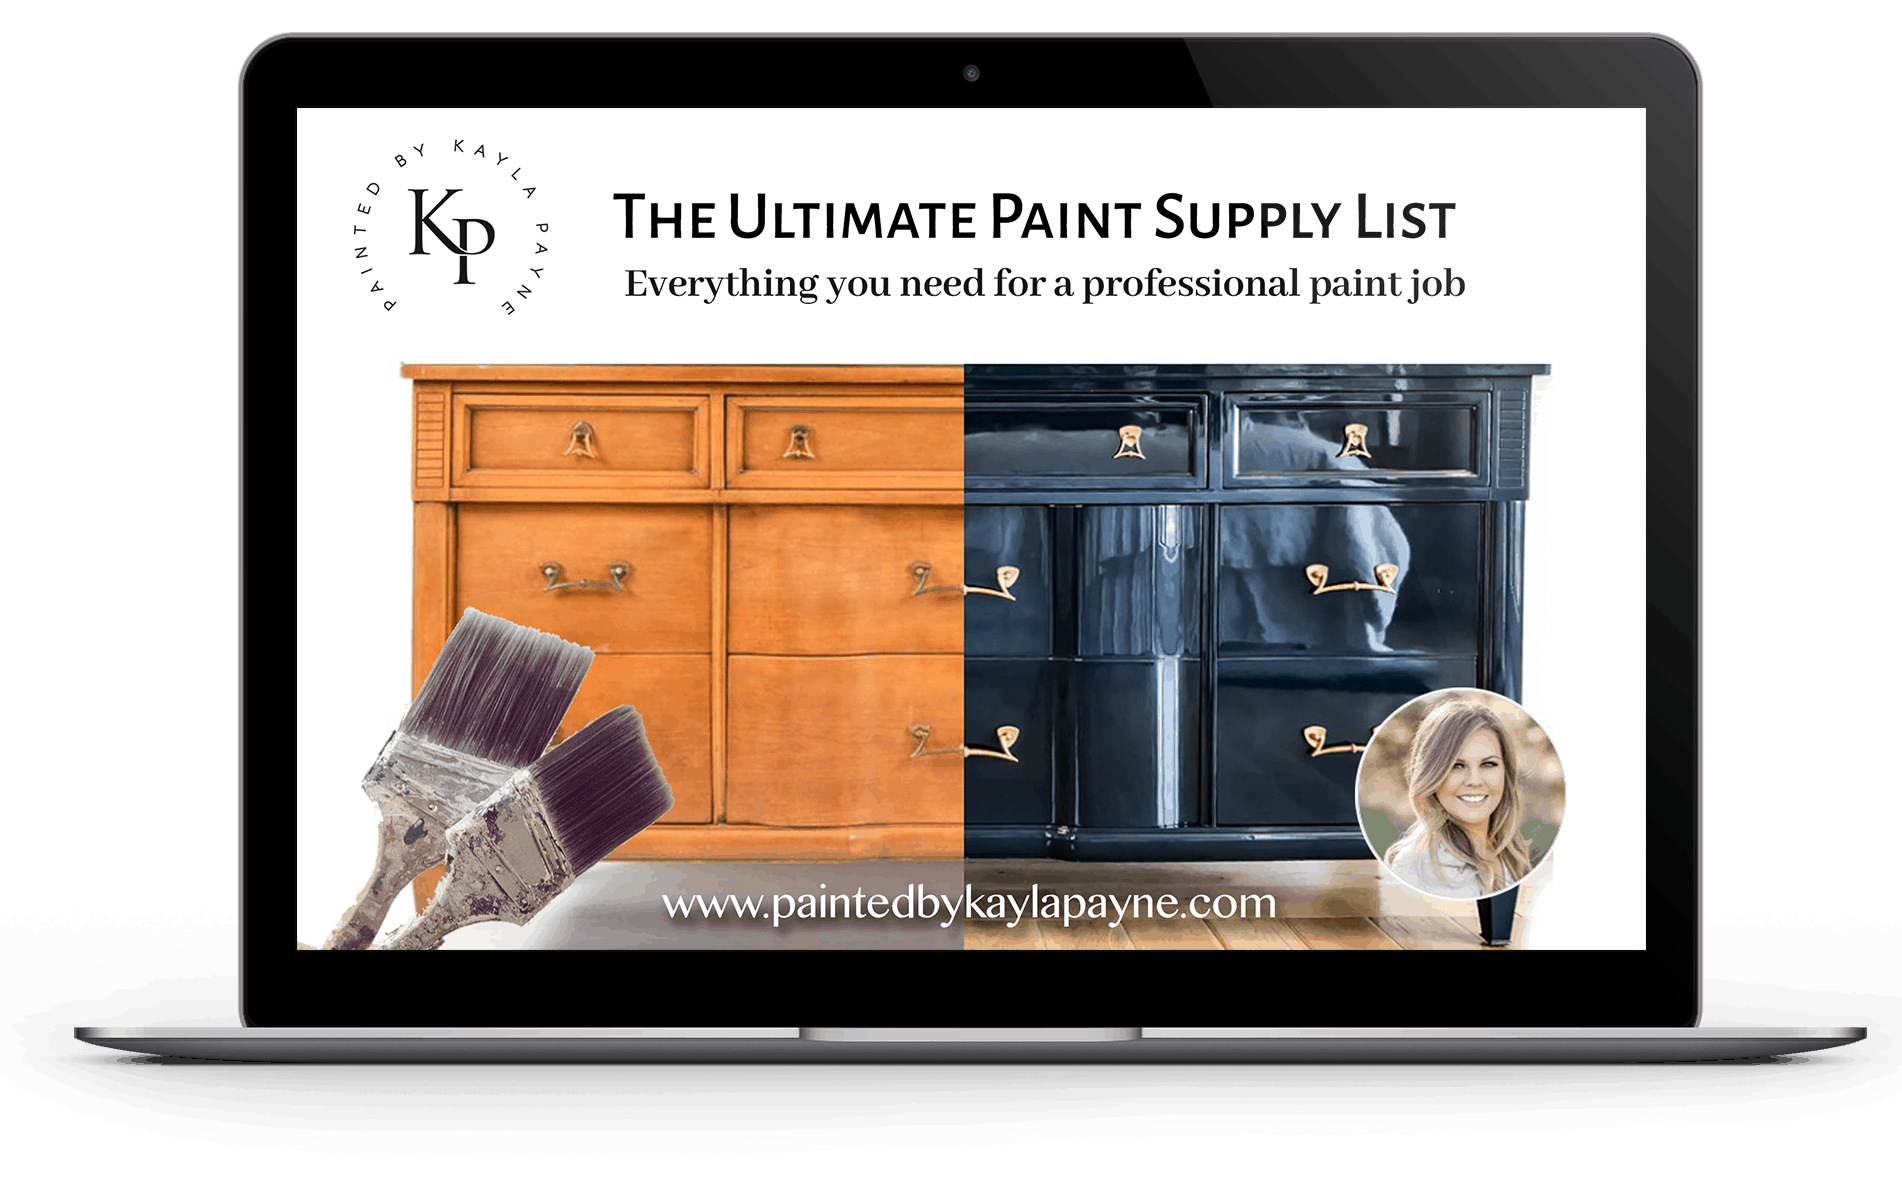 The Ultimate Paint Supply List for painting furniture and cabinets